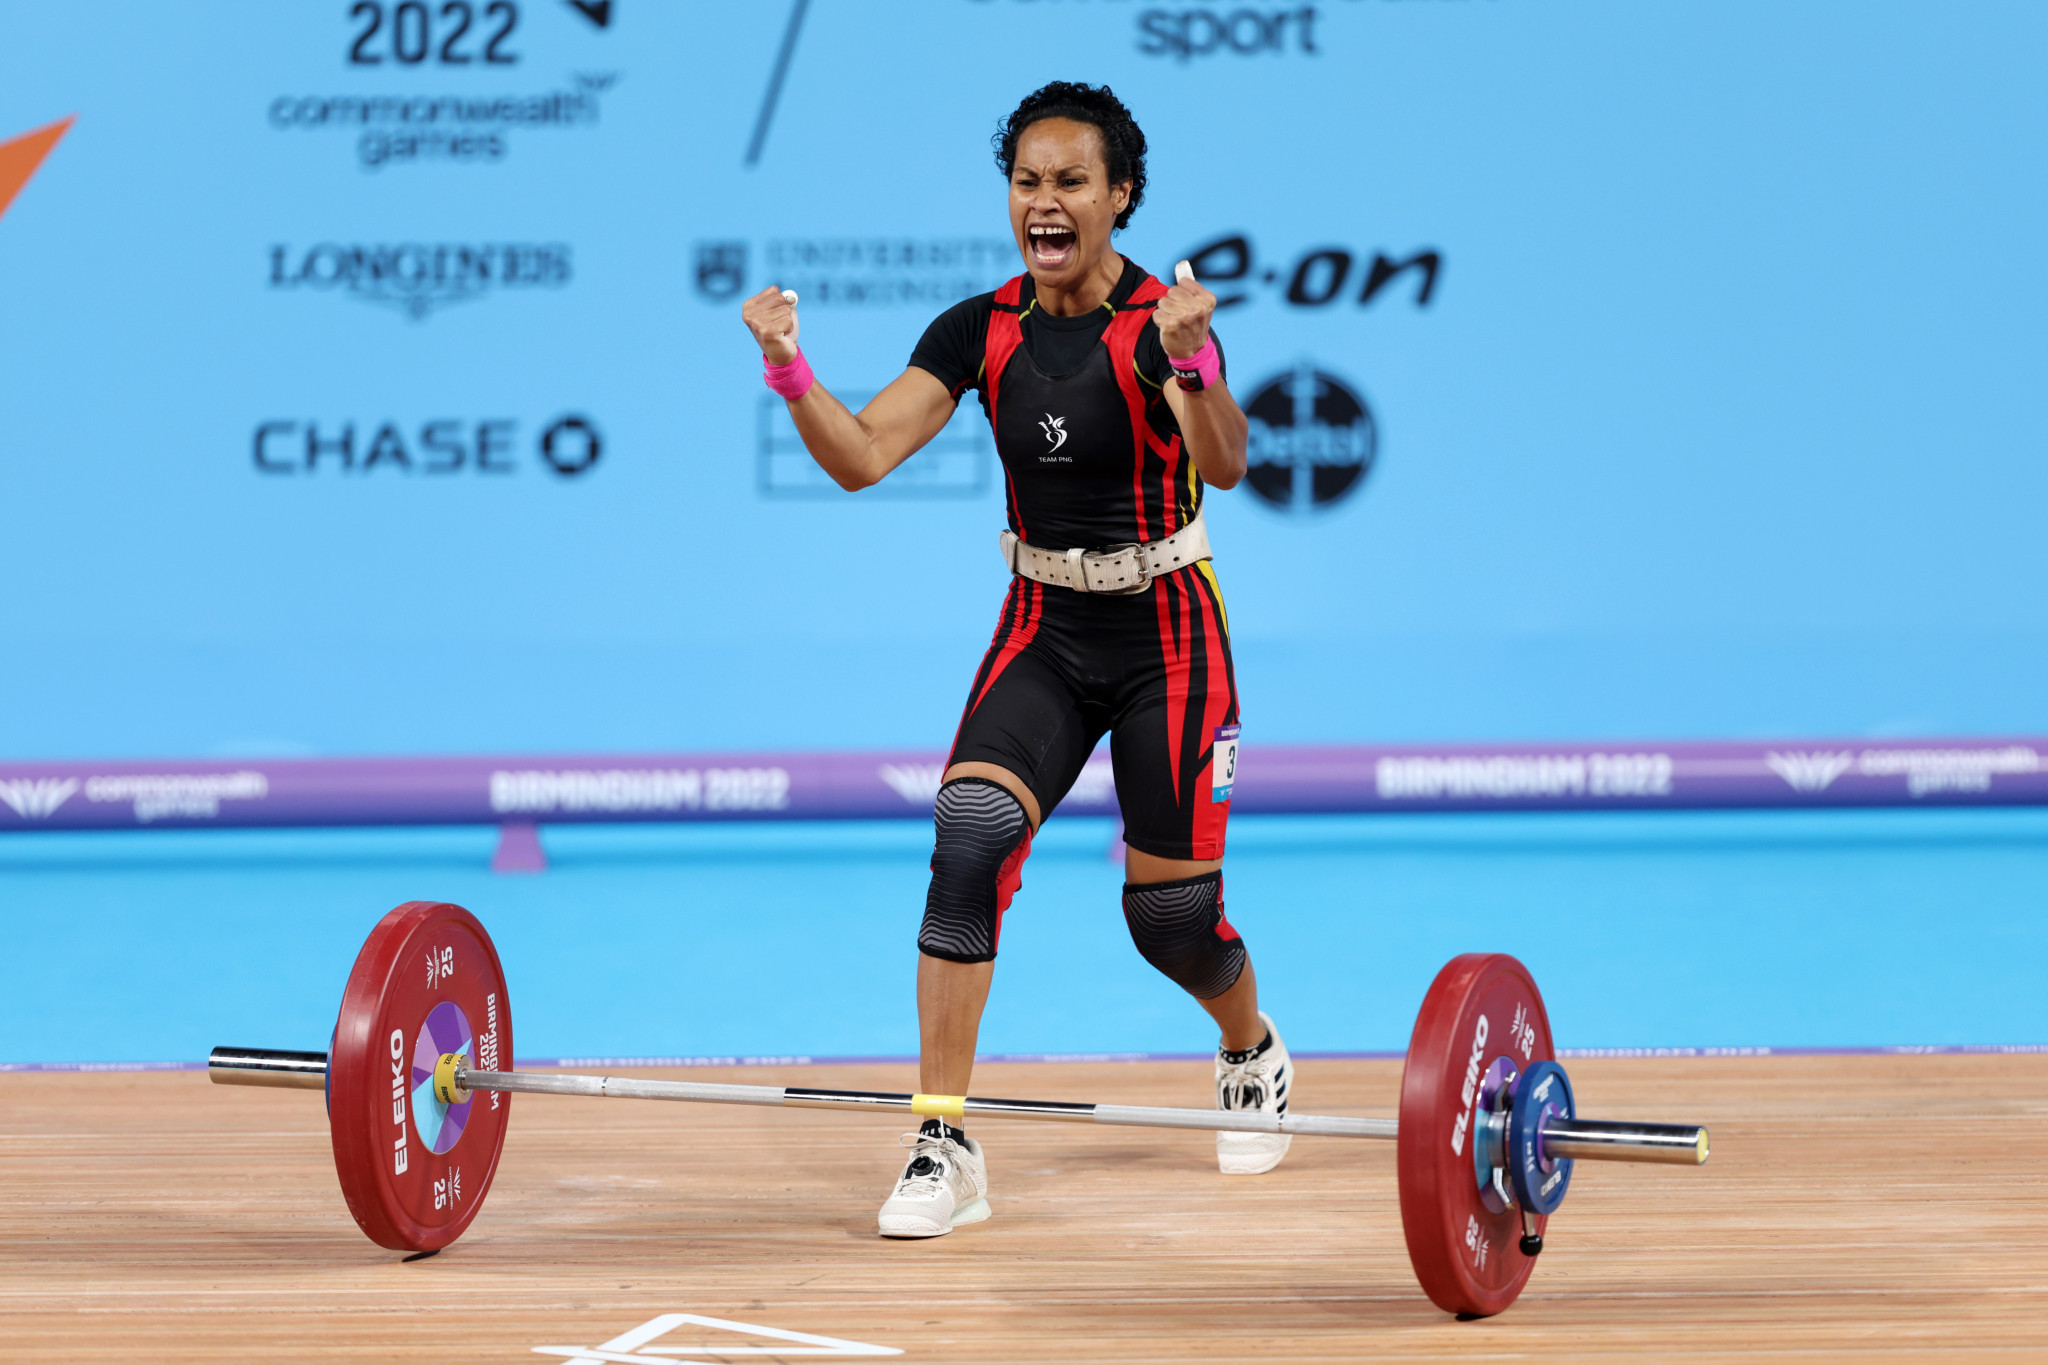 Dika Toua, one of the biggest stars in weightlifting in Oceania, will hope to qualify for a sixth Olympics in Paris ©Getty Images